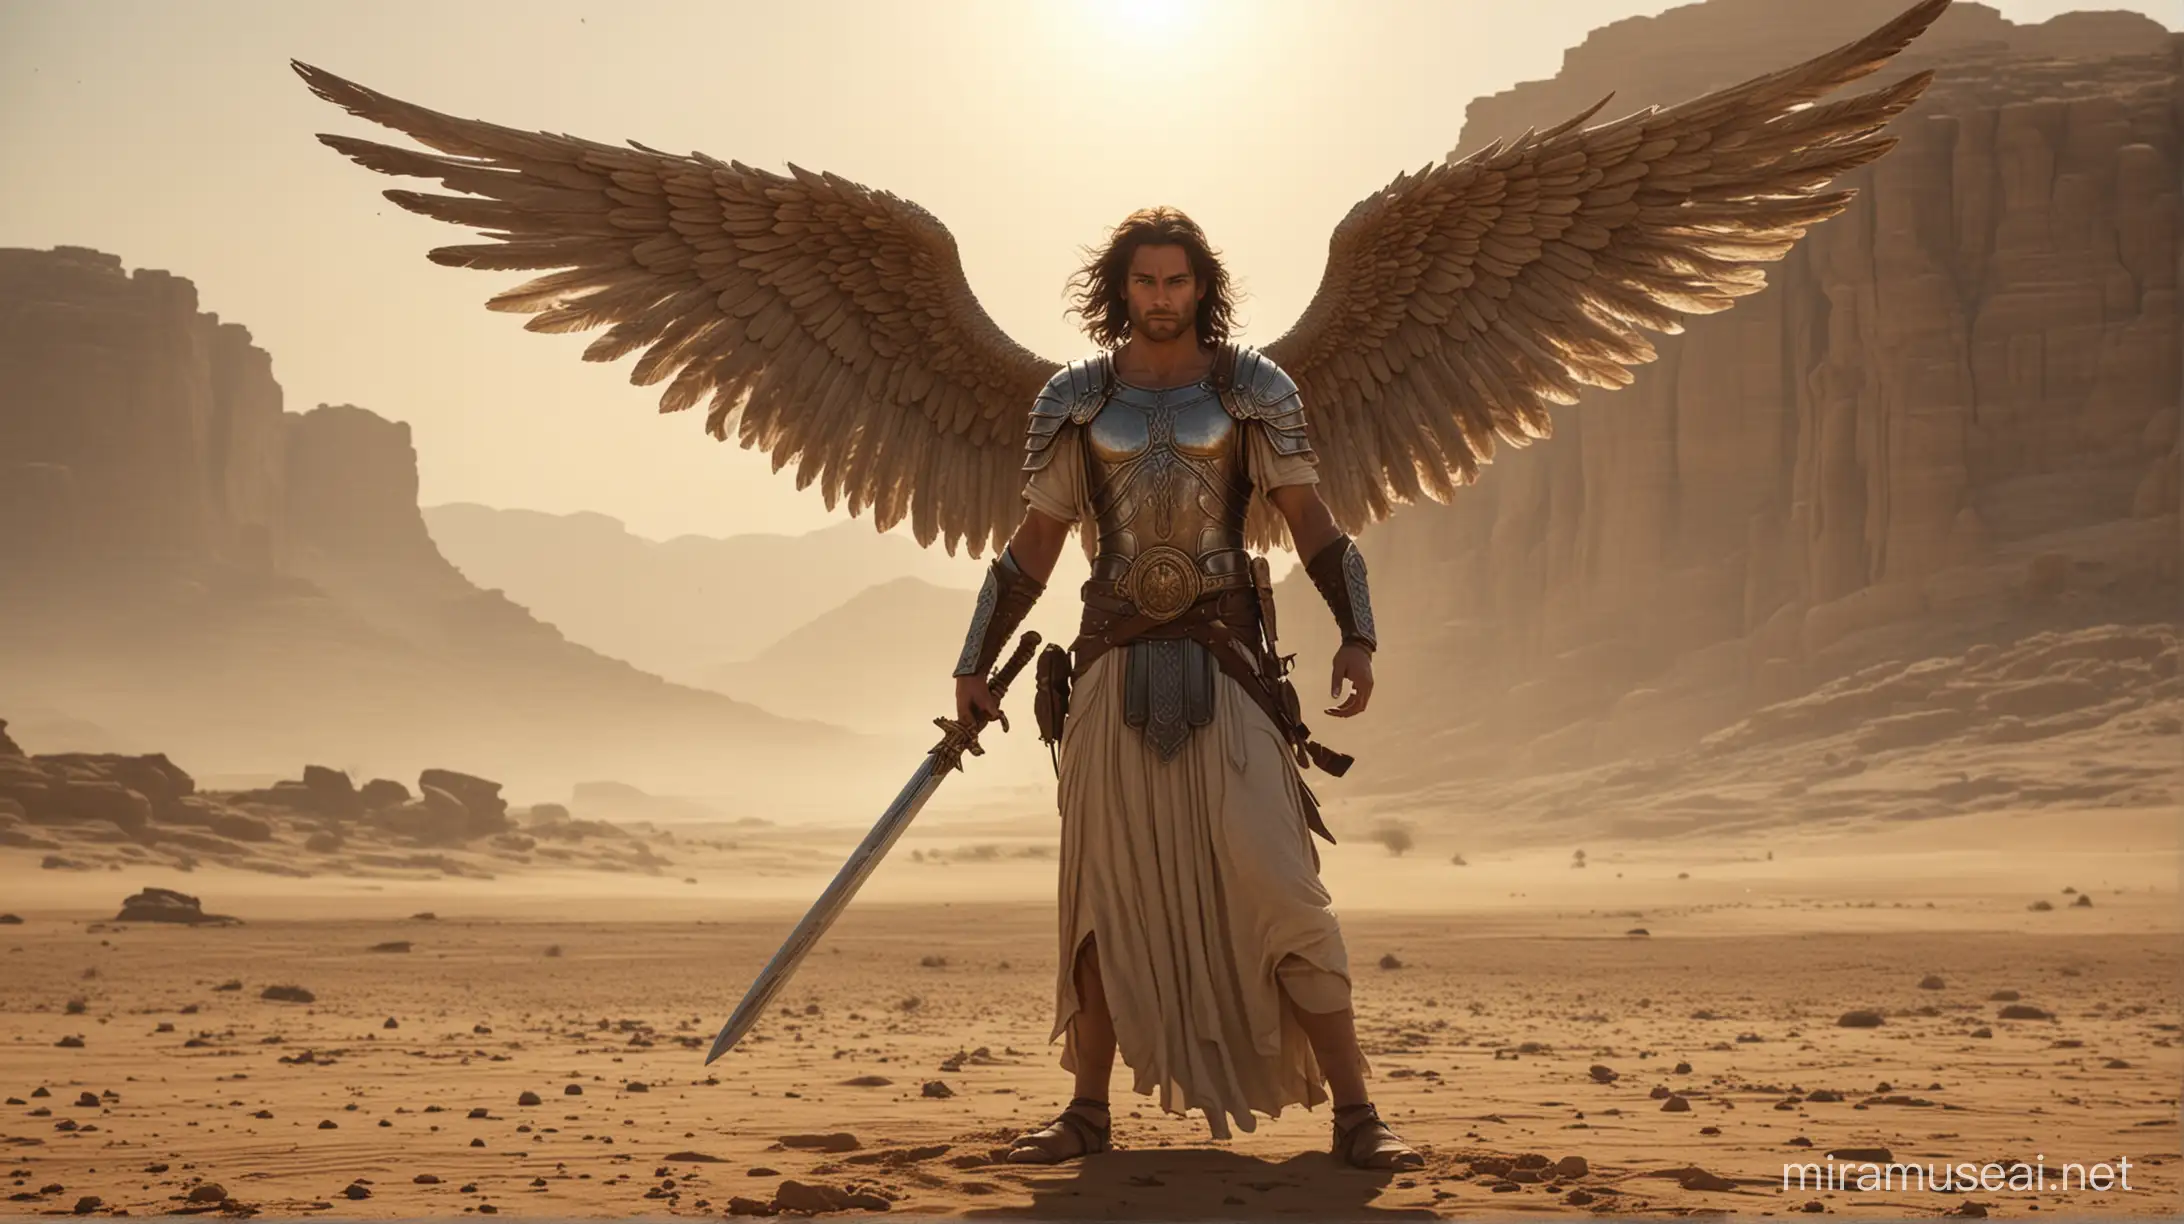 An Angel with a sword drawn standing in the way in the desert in moses era